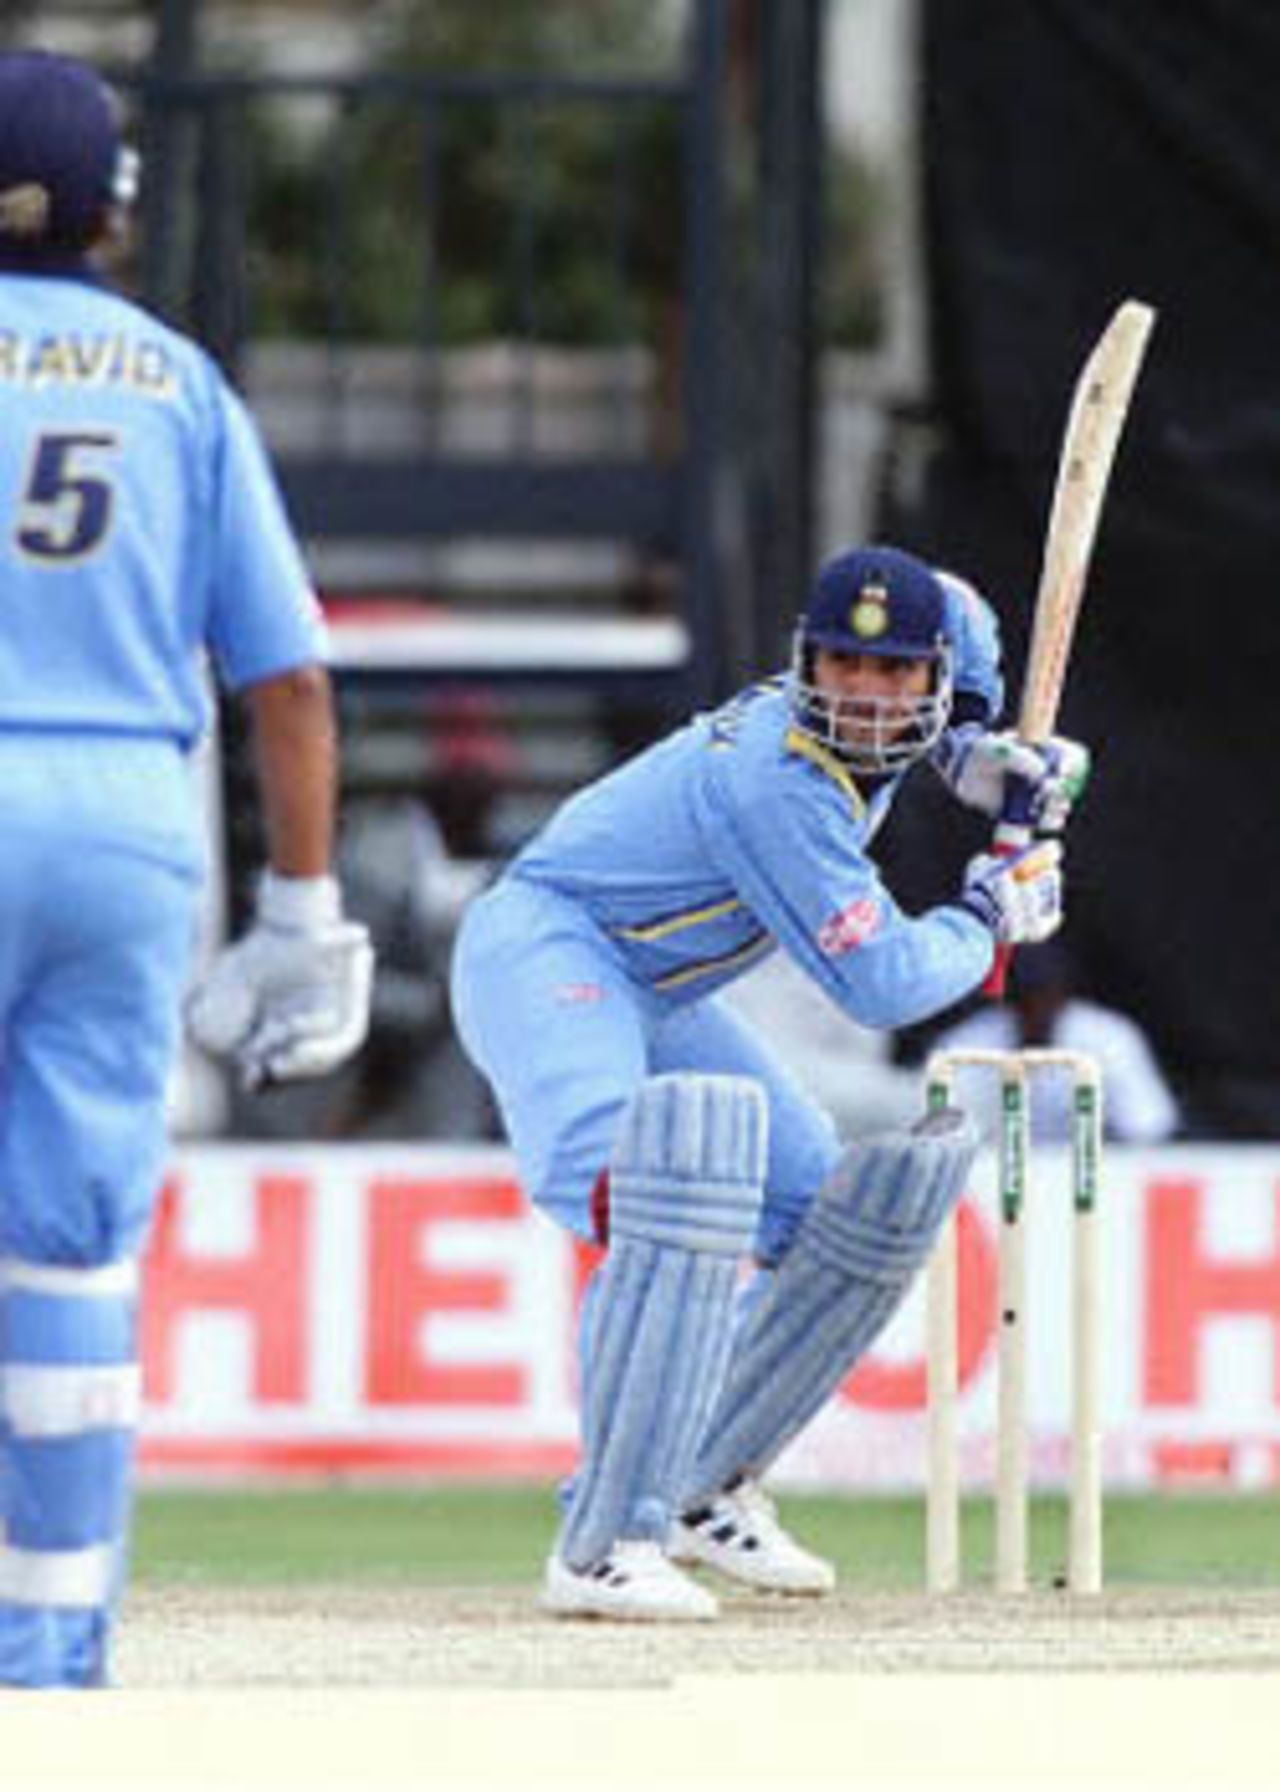 India's Captain Sourav Ganguly about to play the ball through the offside during India's opening game against Kenya.